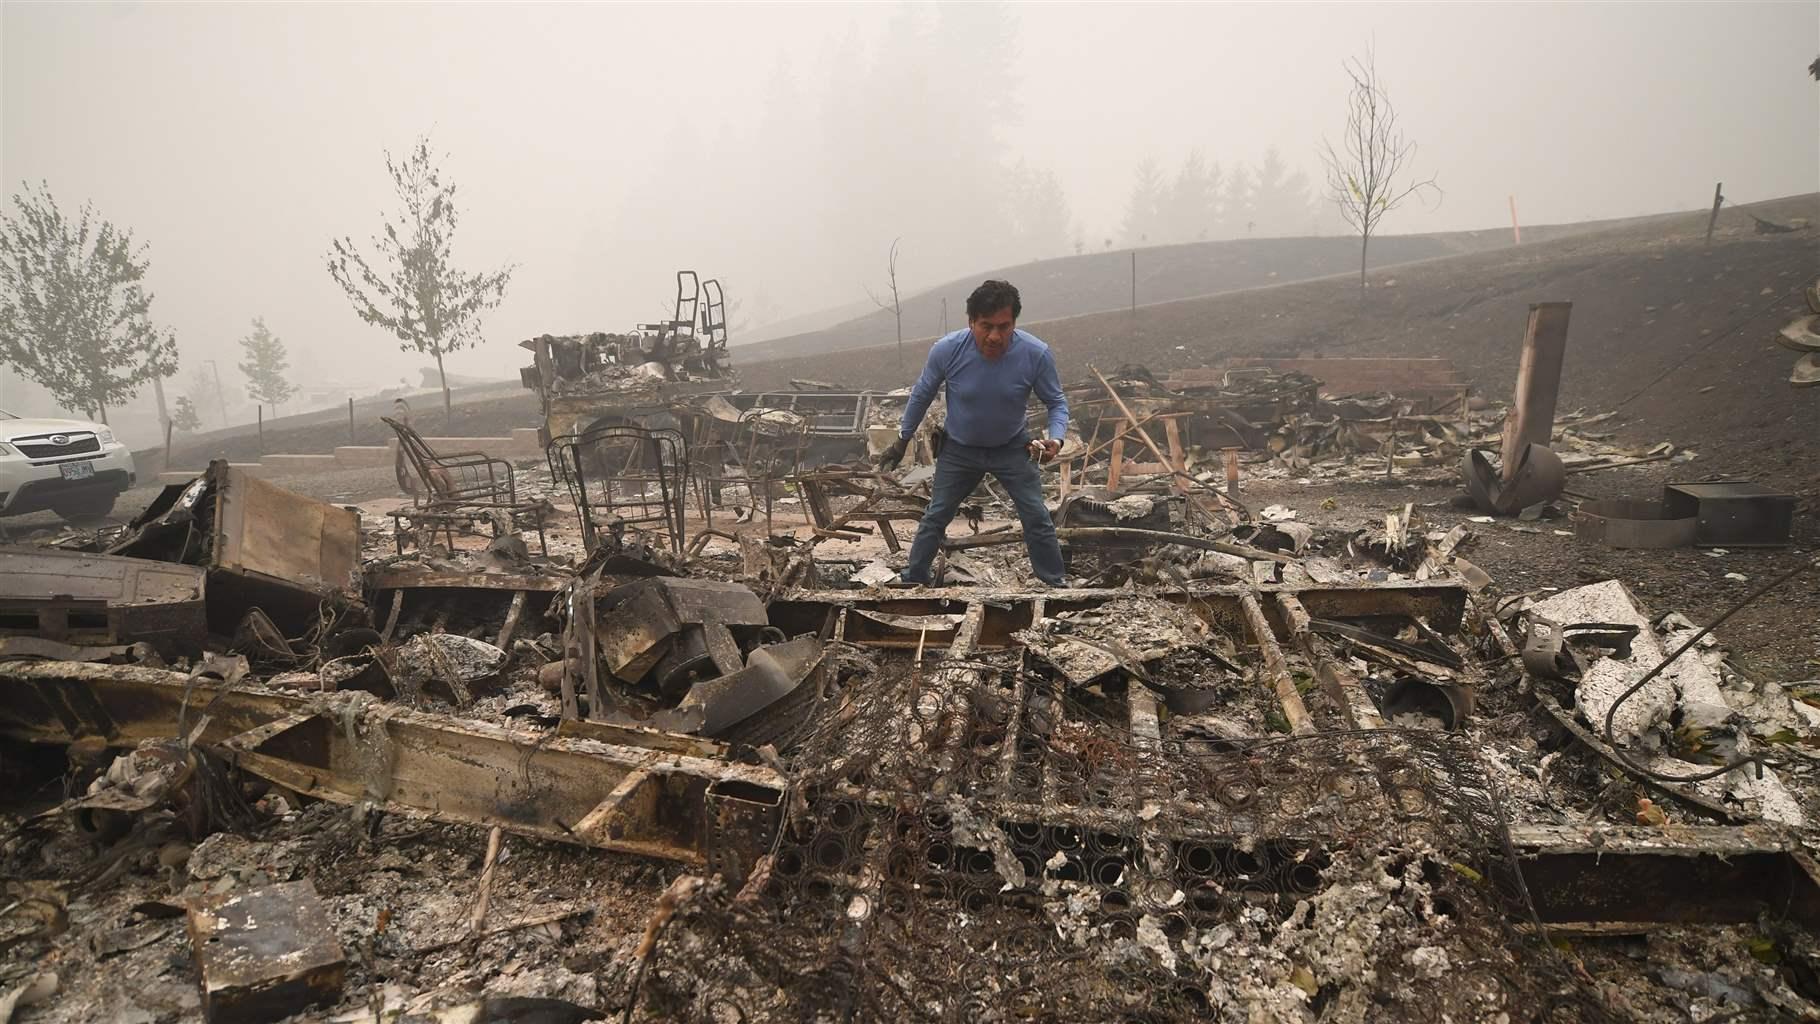 Marcelino Maceda looks for items in the remains of his mobile home after a wildfire sweep through the R.V. park destroying multiple homes in Estacada, Oregon September 12, 2020. - US officials girded today for the possibility of mass fatalities from raging wildfires up and down the West Coast, as evacuees recounted the pain of leaving everything behind in the face of fast-moving flames. Dense smog from US wildfires that have burnt nearly five million acres and killed 27 people smothered the West Coast on September 12. 